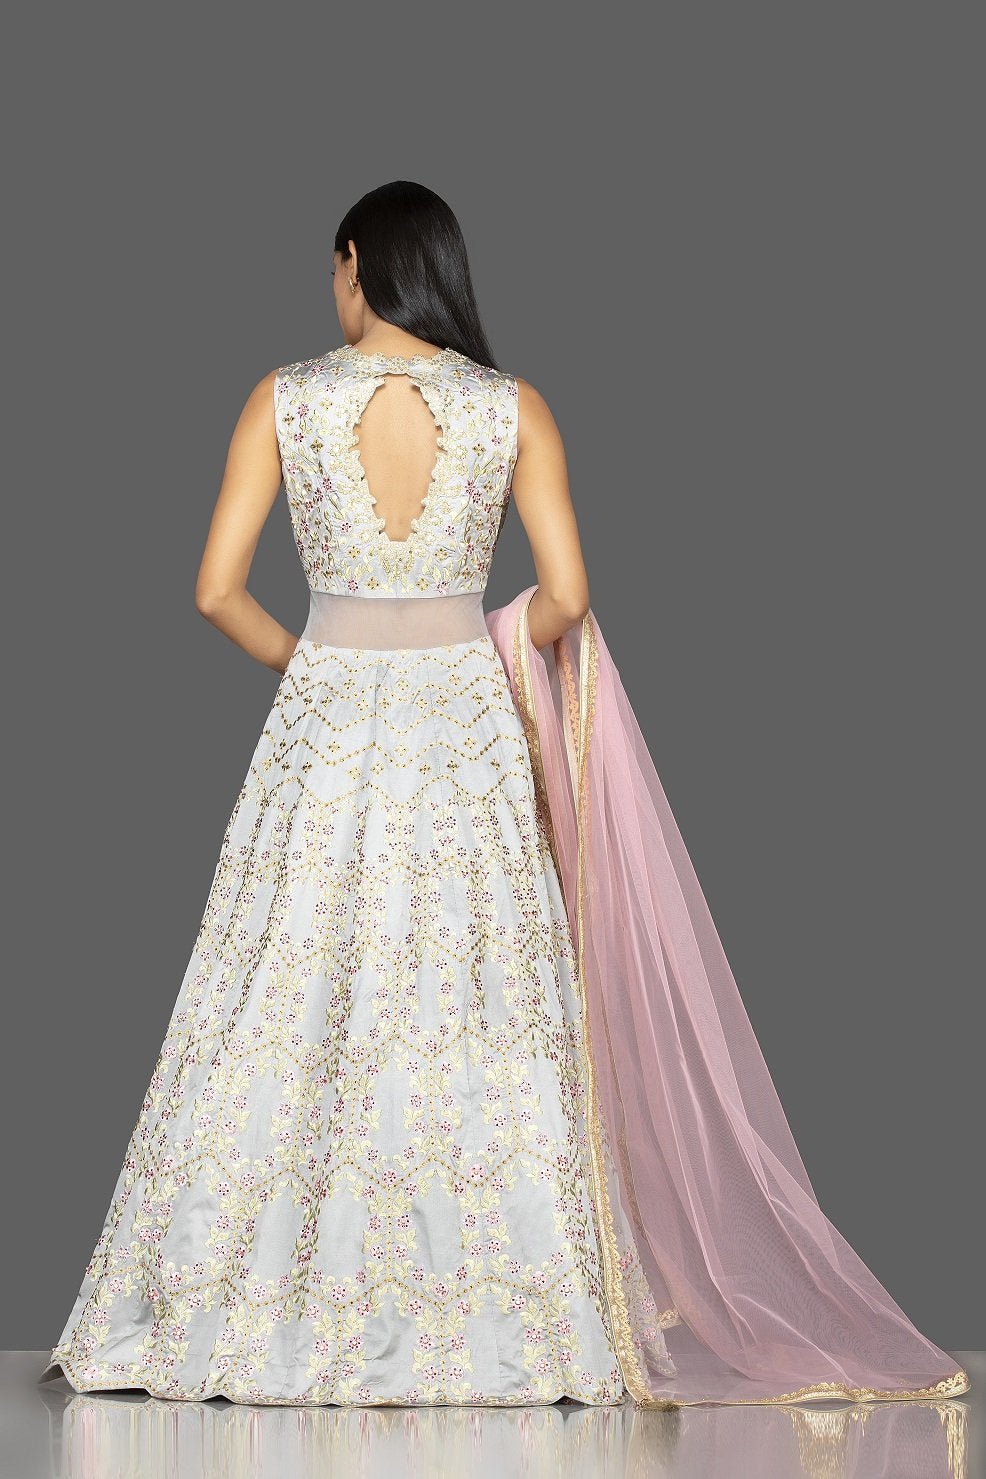 Buy stunning powder blue embroidered sheer Anarkali online in USA with pink dupatta. Look radiant on weddings and special occasions in splendid designer Indian dresses, wedding lehengas crafted with finest embroideries and stunning silhouettes from Pure Elegance Indian fashion boutique in USA.-back